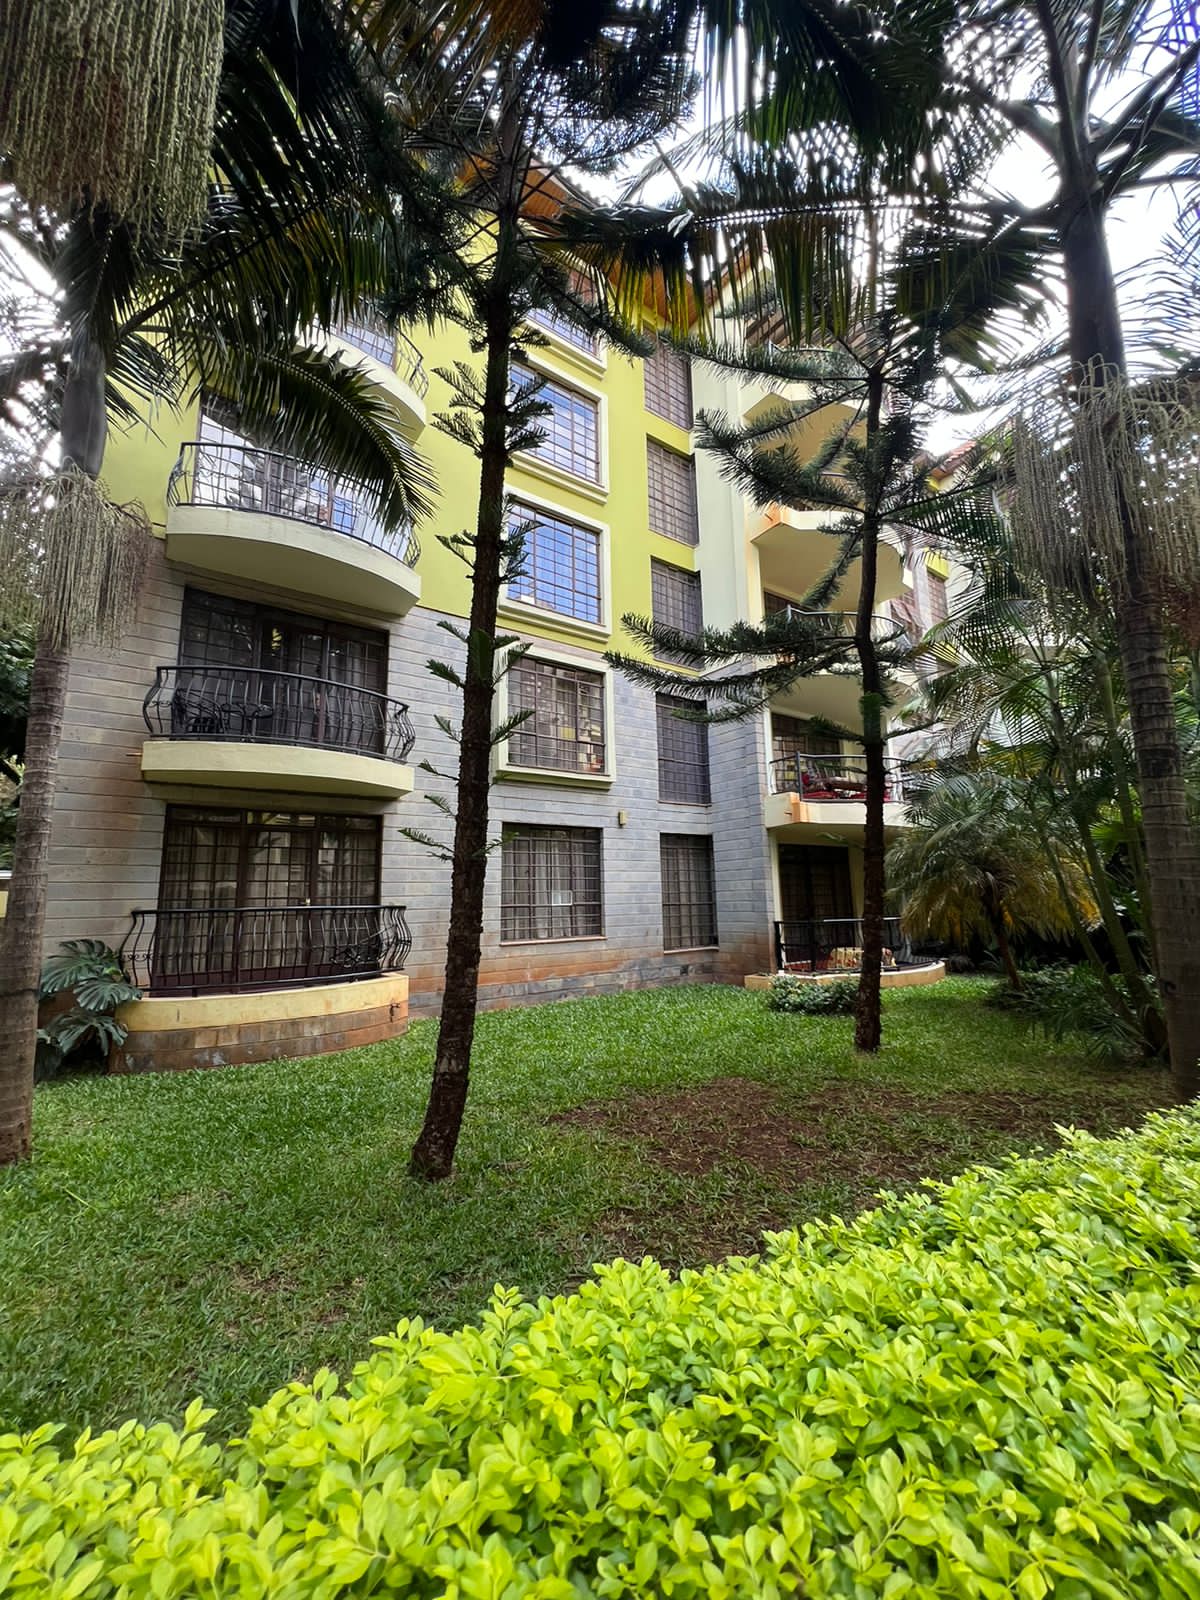 4 bedroom duplex apartment to let in lavington. Swimming pool. Kids playing area. Serene Environment. Rent per month 160K Musilli Homes